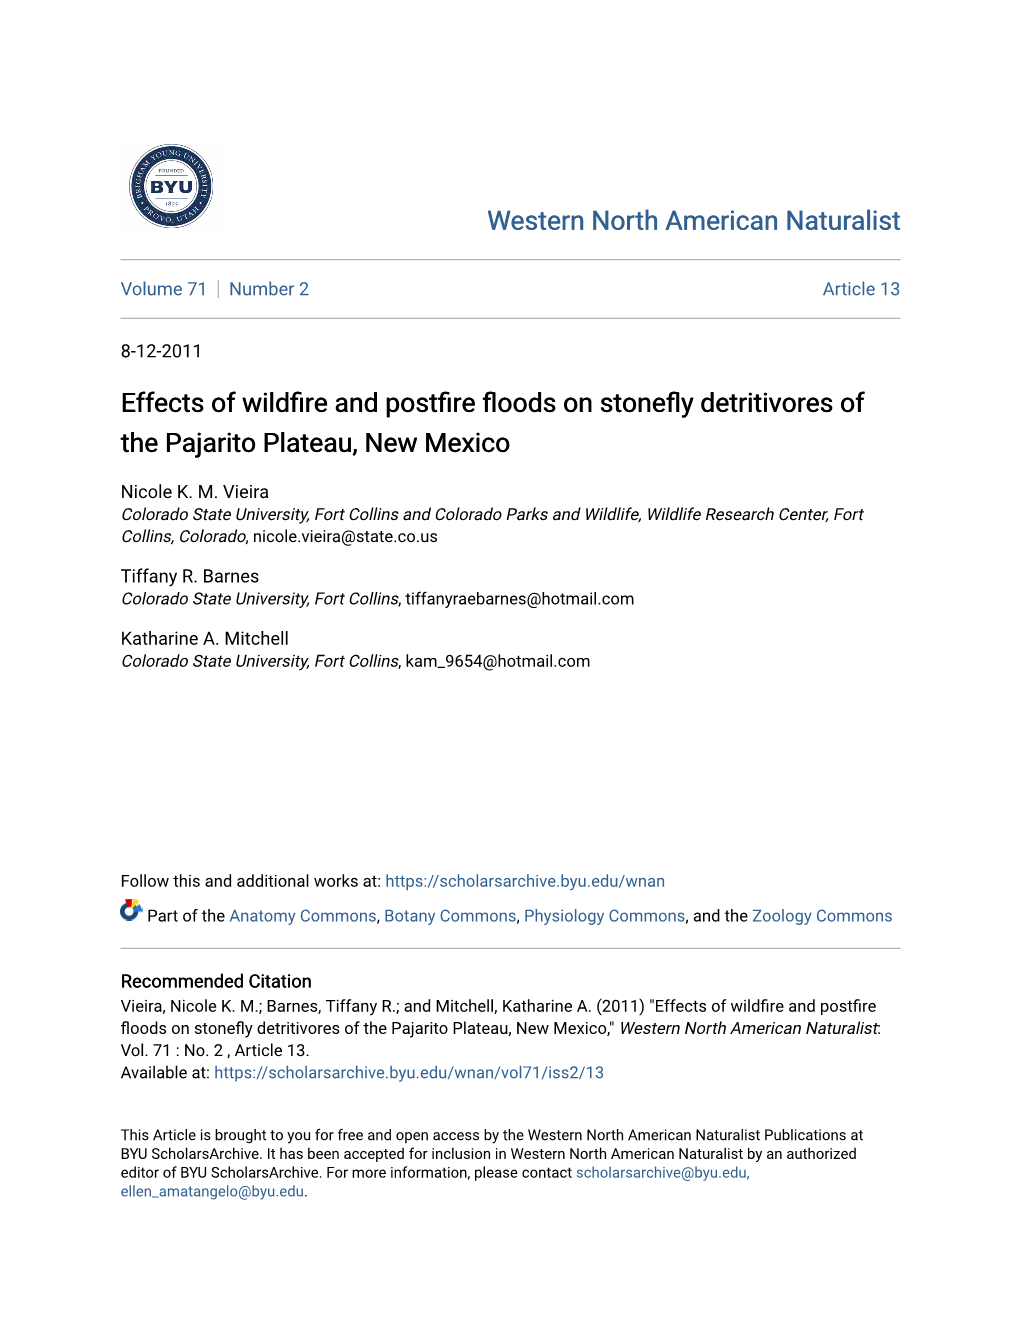 Effects of Wildfire and Postfire Floods on Stonefly Detritivores of the Pajarito Plateau, New Mexico